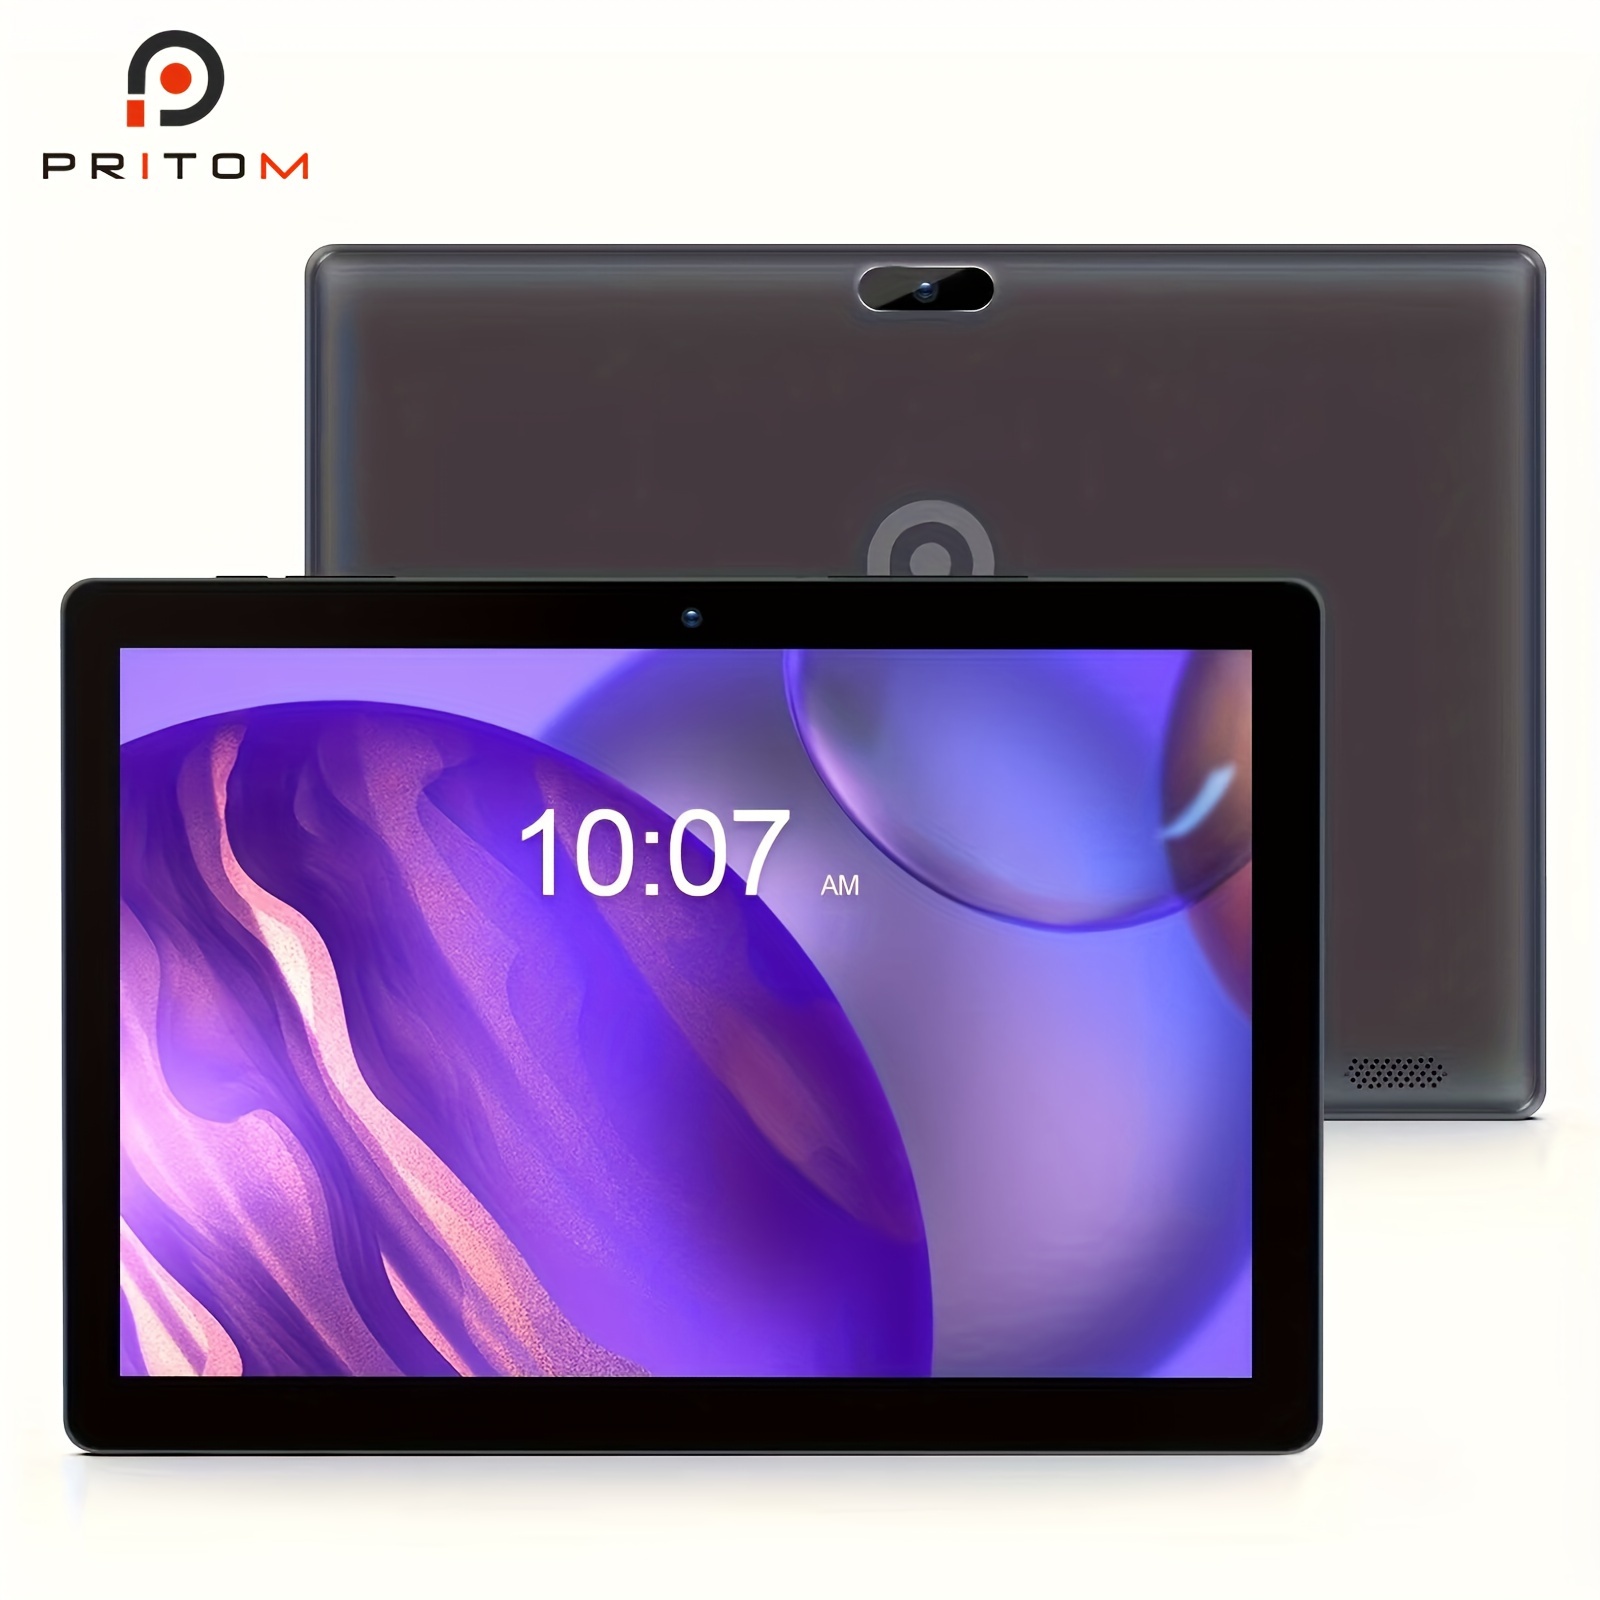 Oscal Android Tablet Blackview Tablets 10.1 inch Tablets 64GB ROM